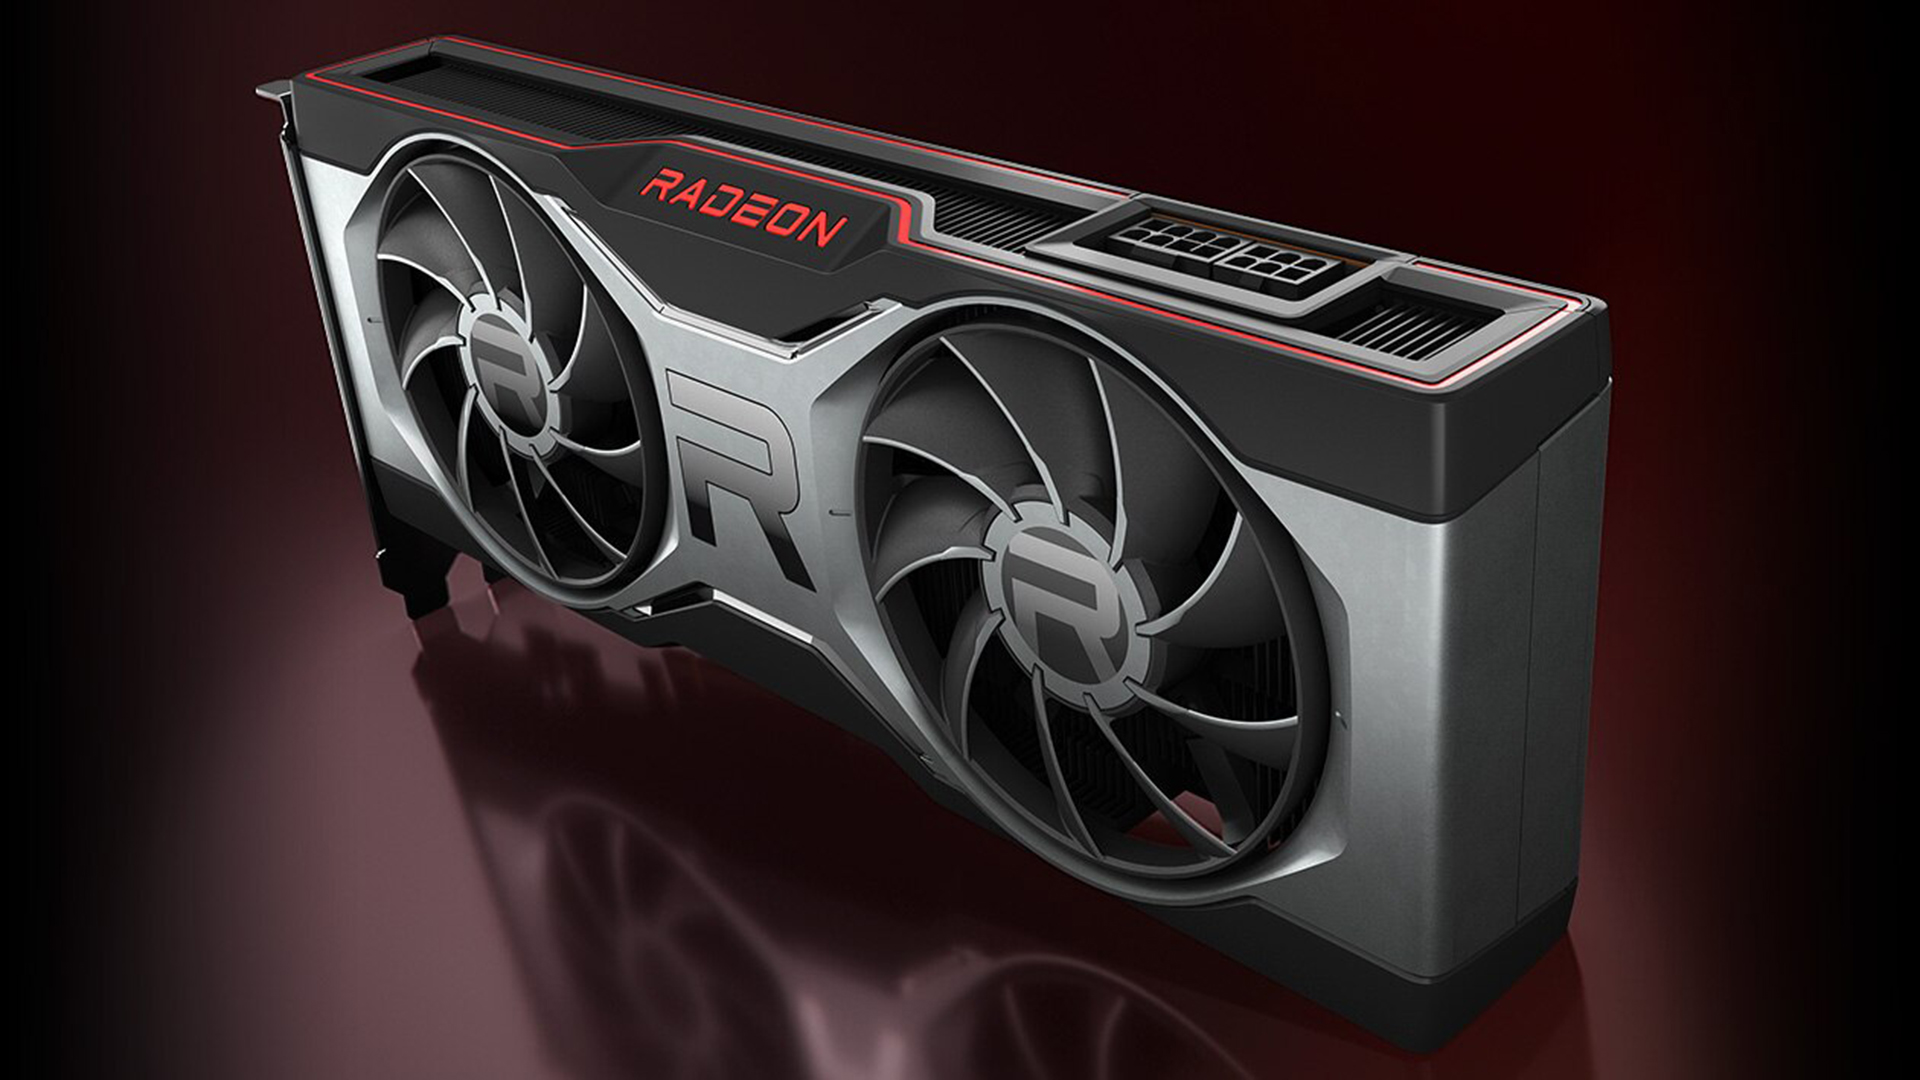 AMD’s flagship RDNA 3 GPU may not have an all-new design after all